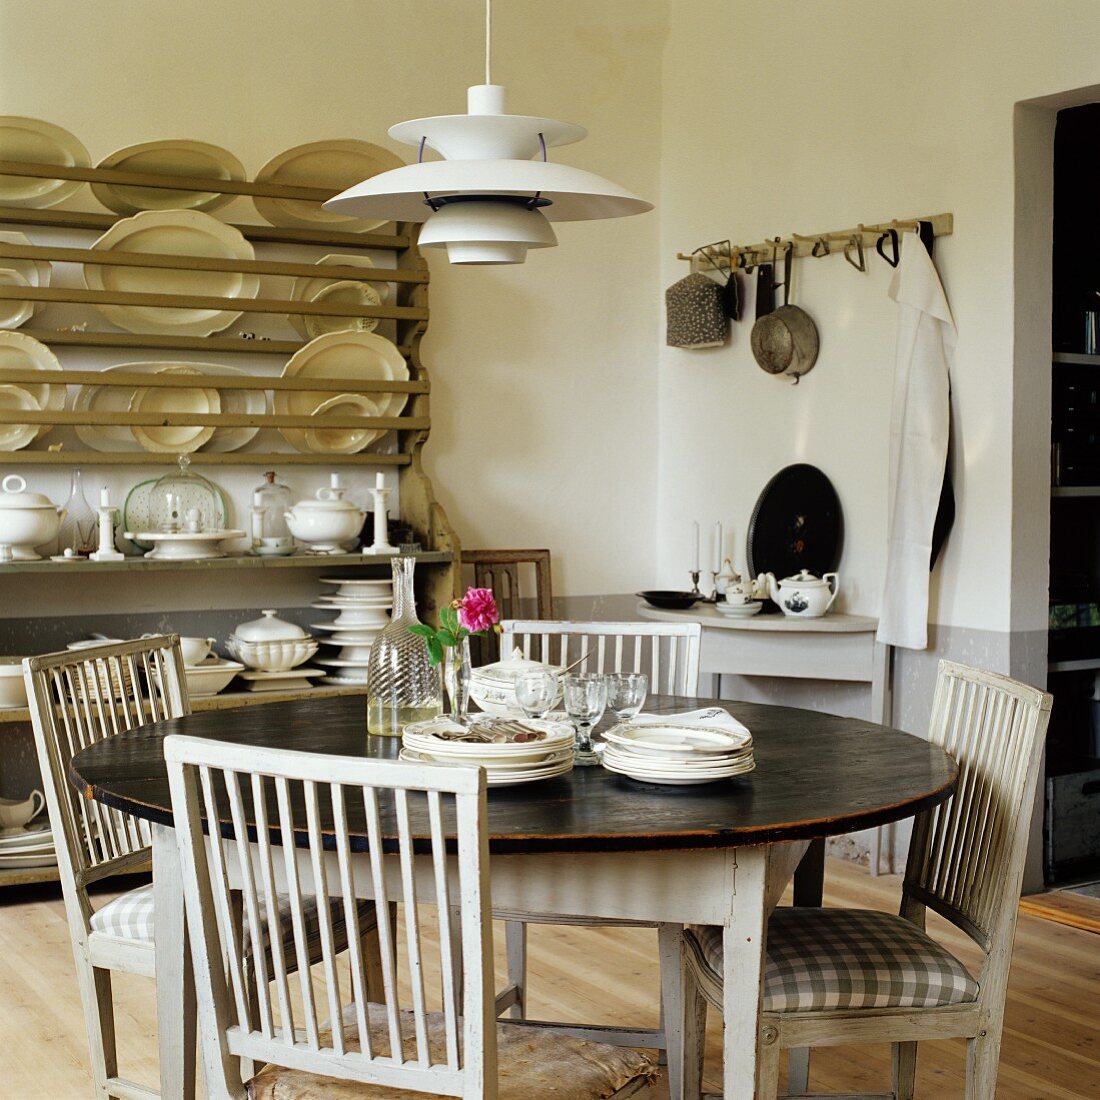 Round dining table, kitchen chairs with seat cushions and 50s, Danish designer lamp; plate rack in background